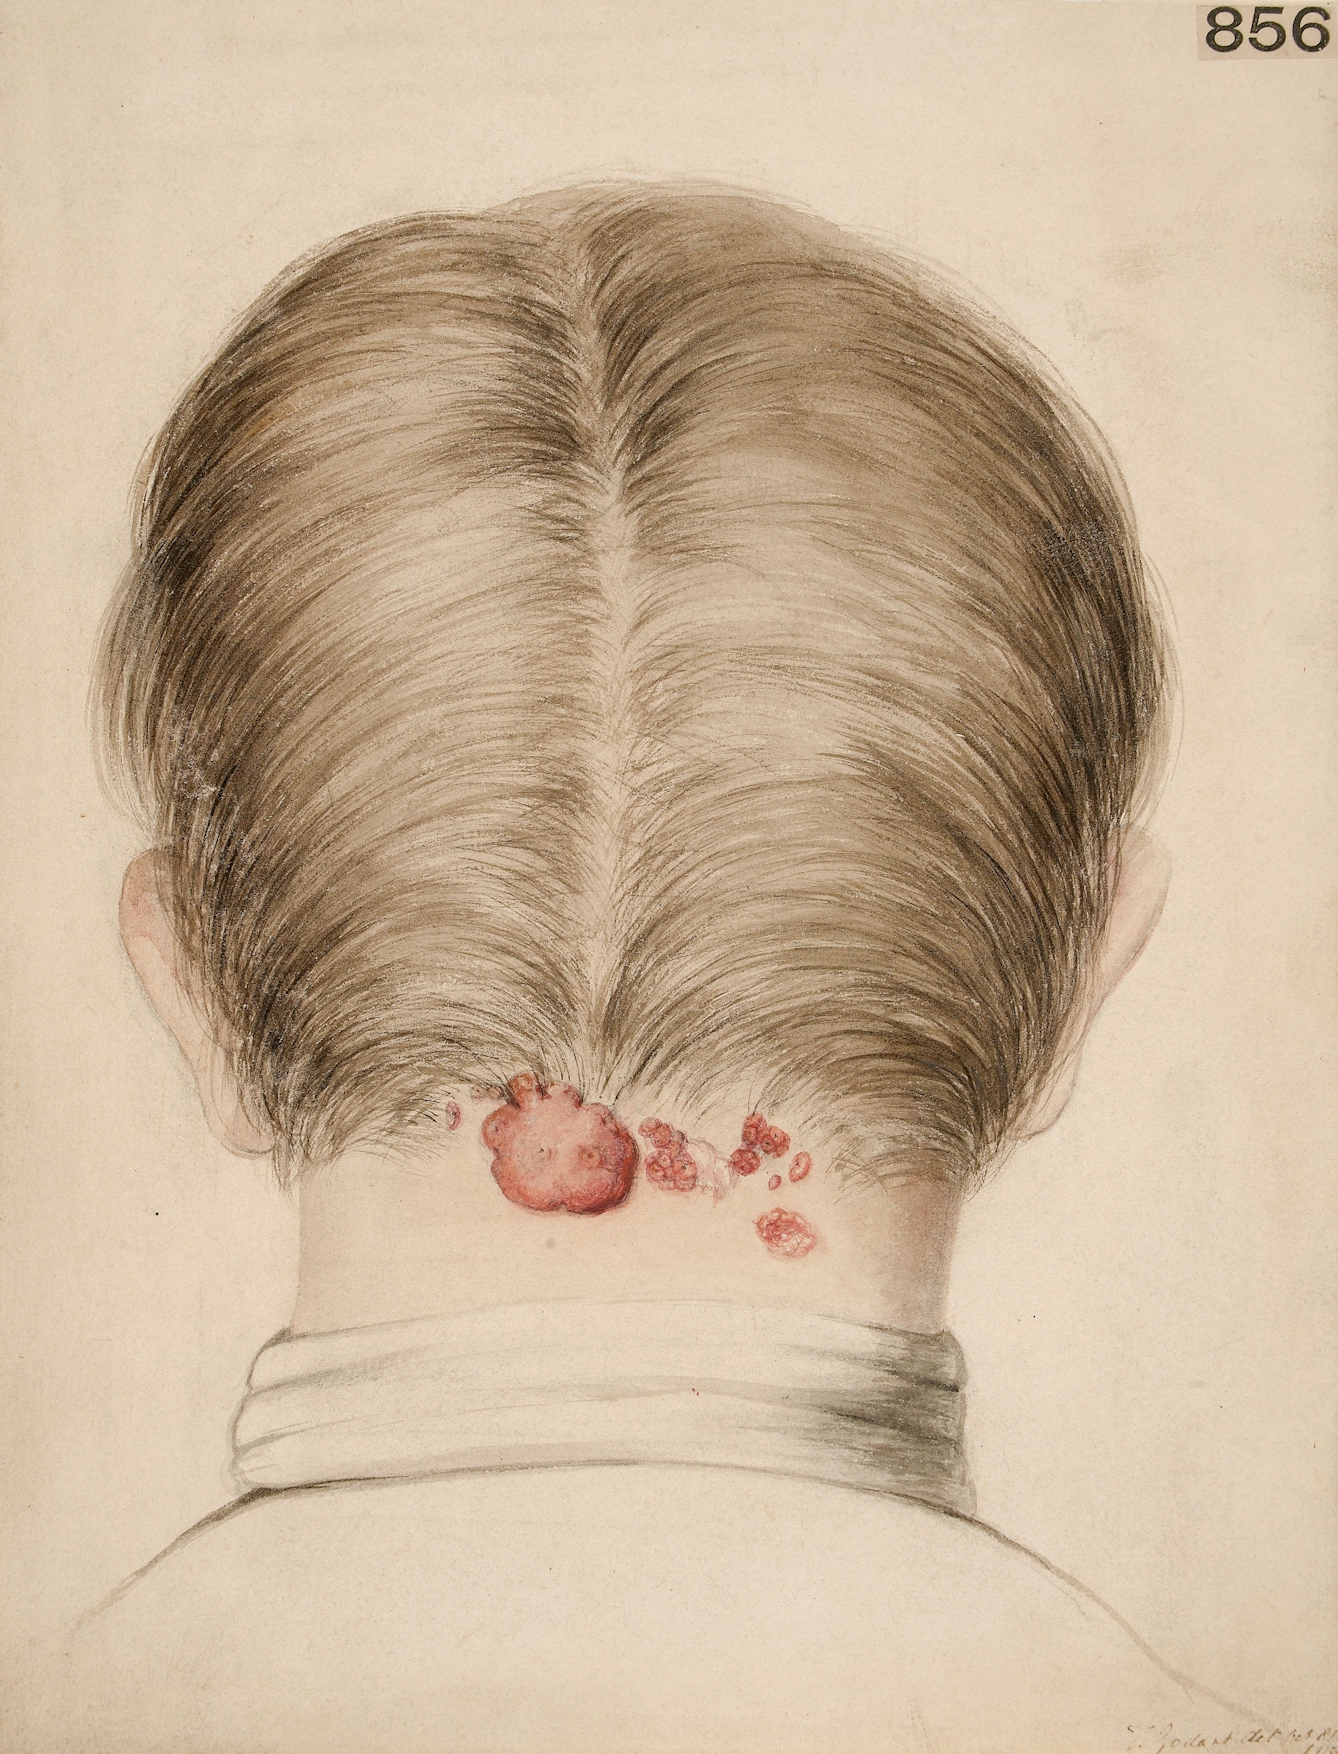 Photograph of an illustration show the back of a man's head, neck and shoulders. On his neck is a red acne keloid.